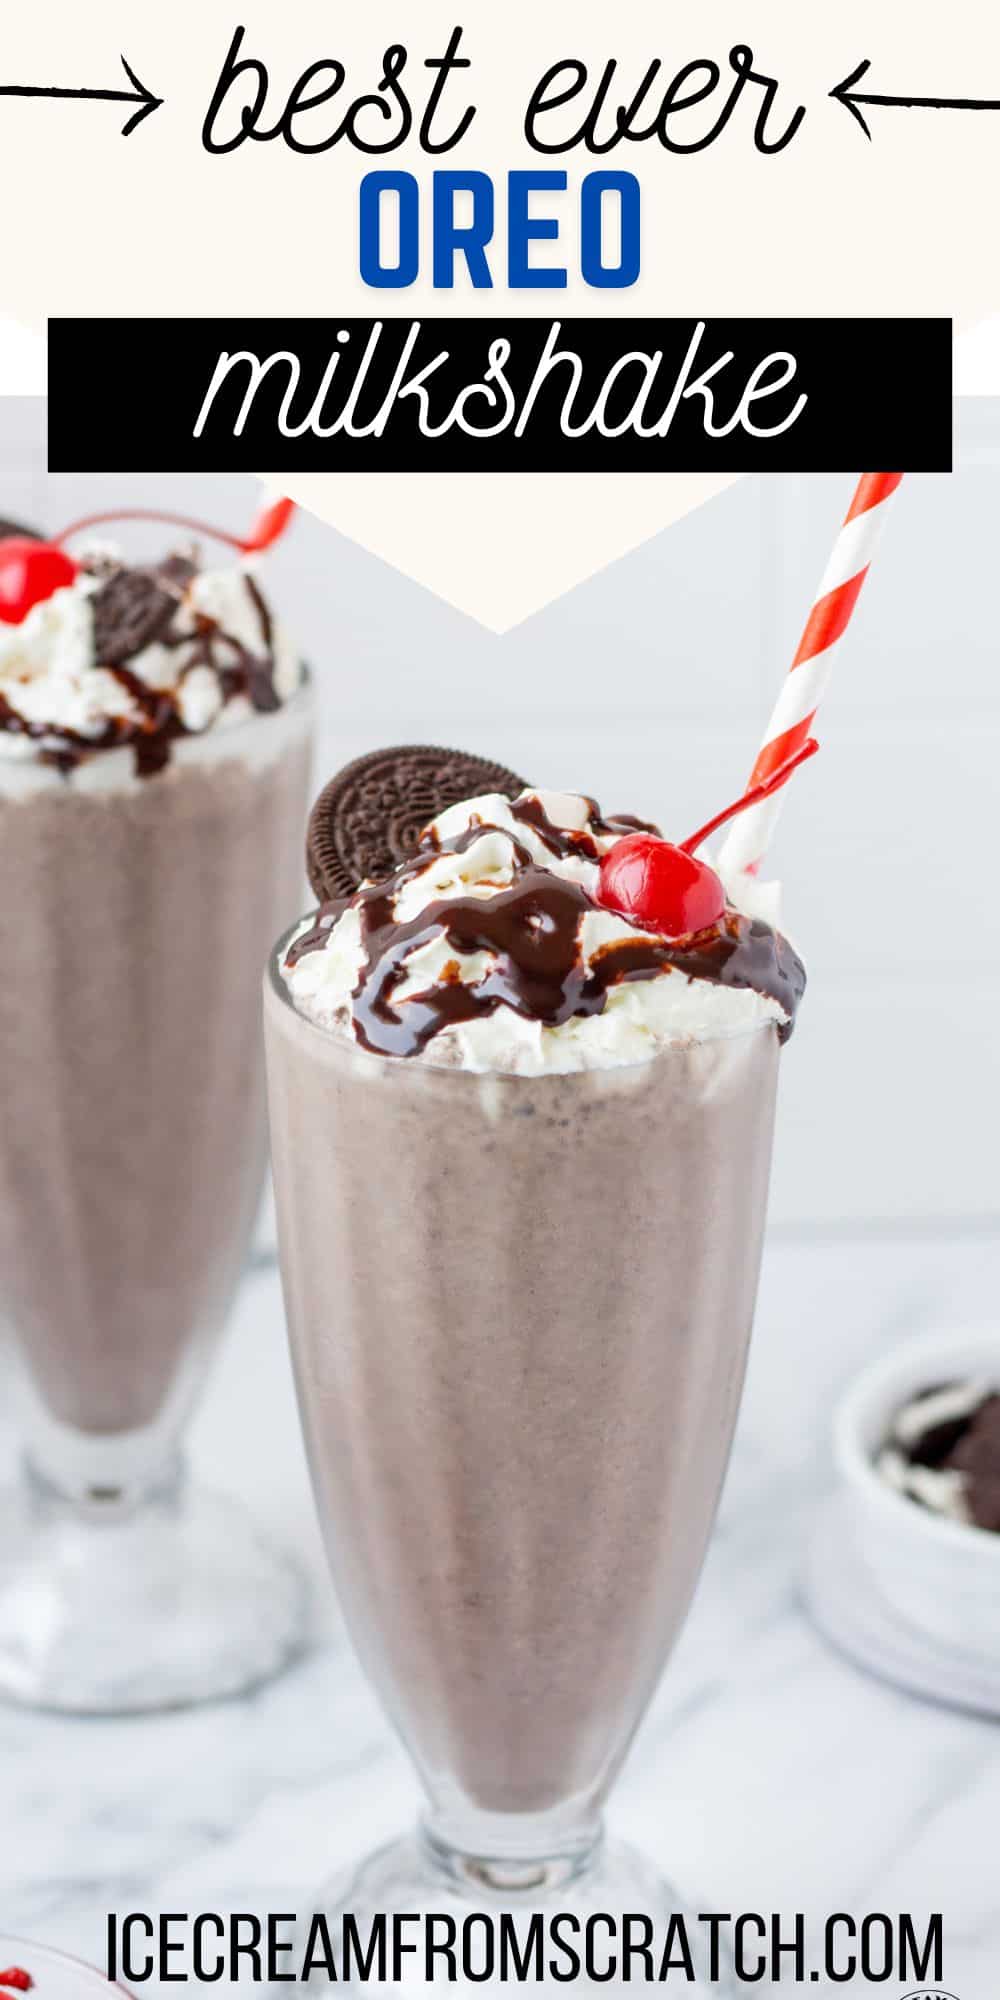 two tall milkshake glasses filled with Oreo milkshakes, topped with whipped cream, chocolate sauce, a cherry, and an oreo. Each has a red and white striped straw . Text at top of image says "best ever oreo milkshake"